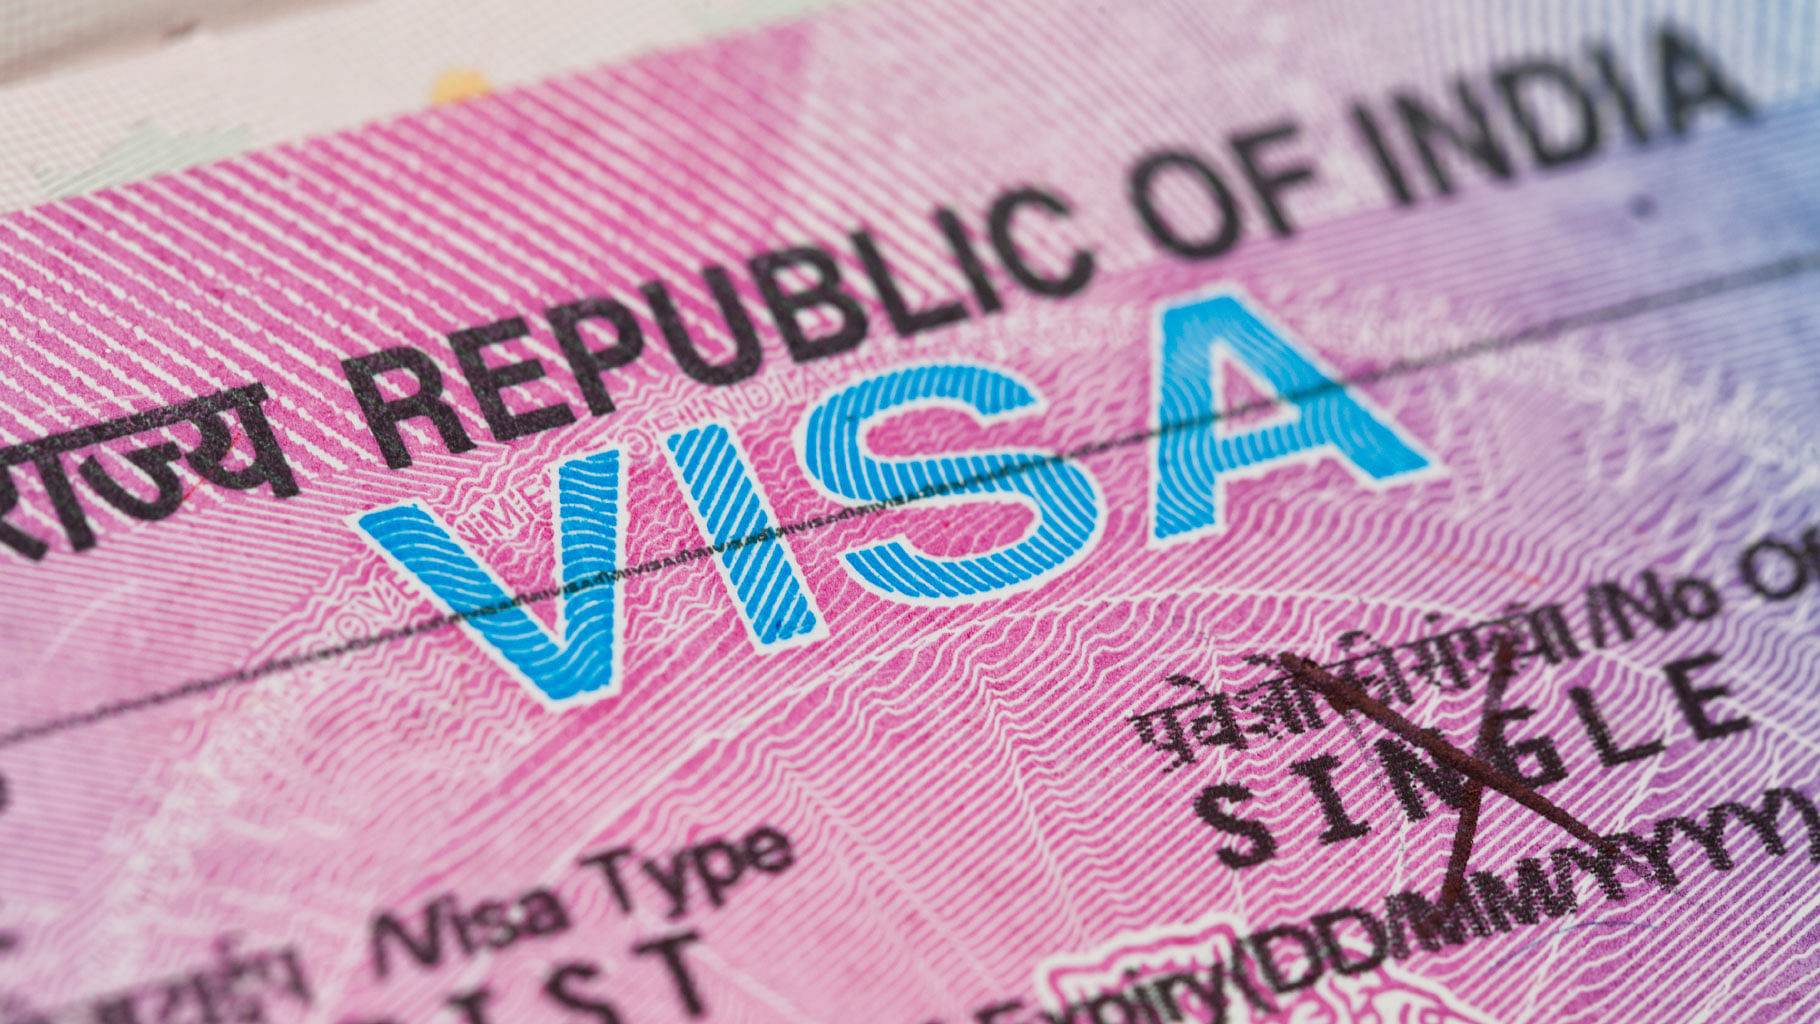 The number of visas issues increased by 1,040 percent. (Photo: iStockphoto)